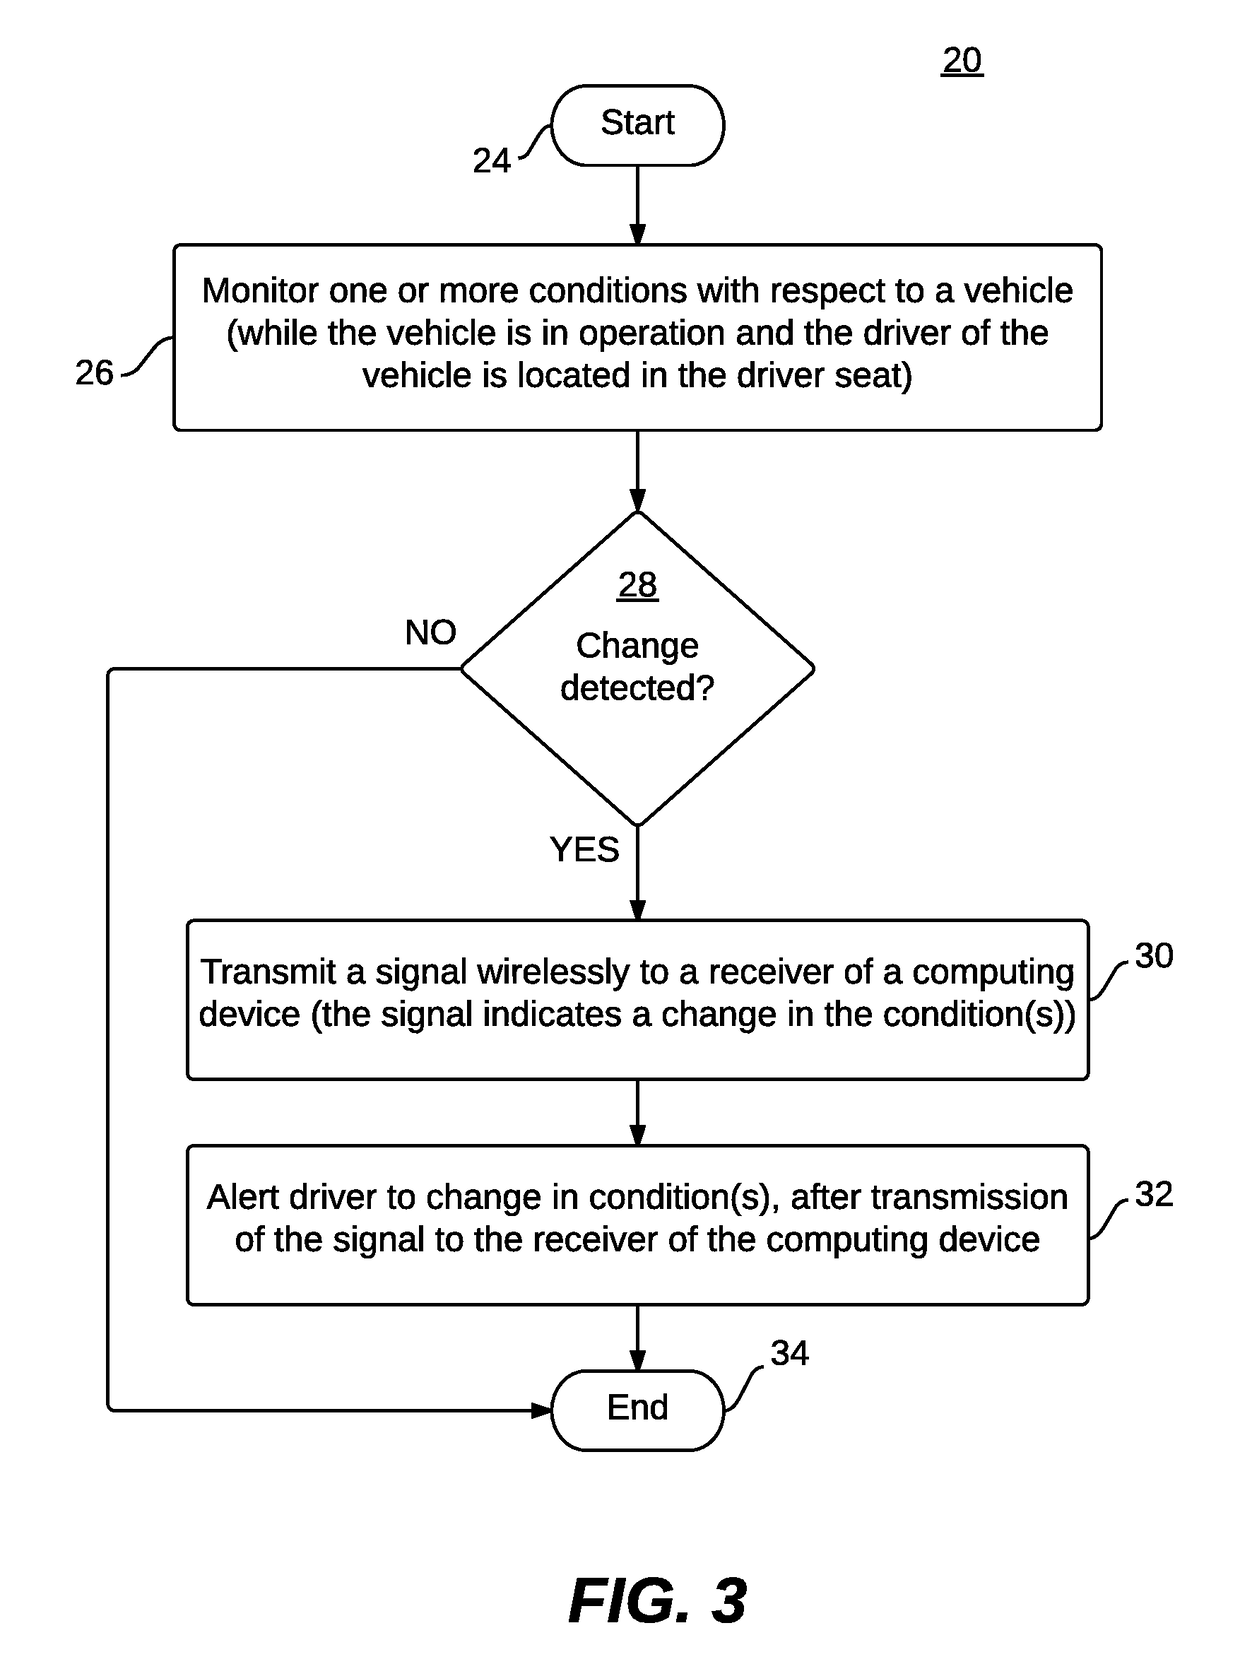 Methods and systems for providing alerts to a connected vehicle driver and/or a passenger via condition detection and wireless communications